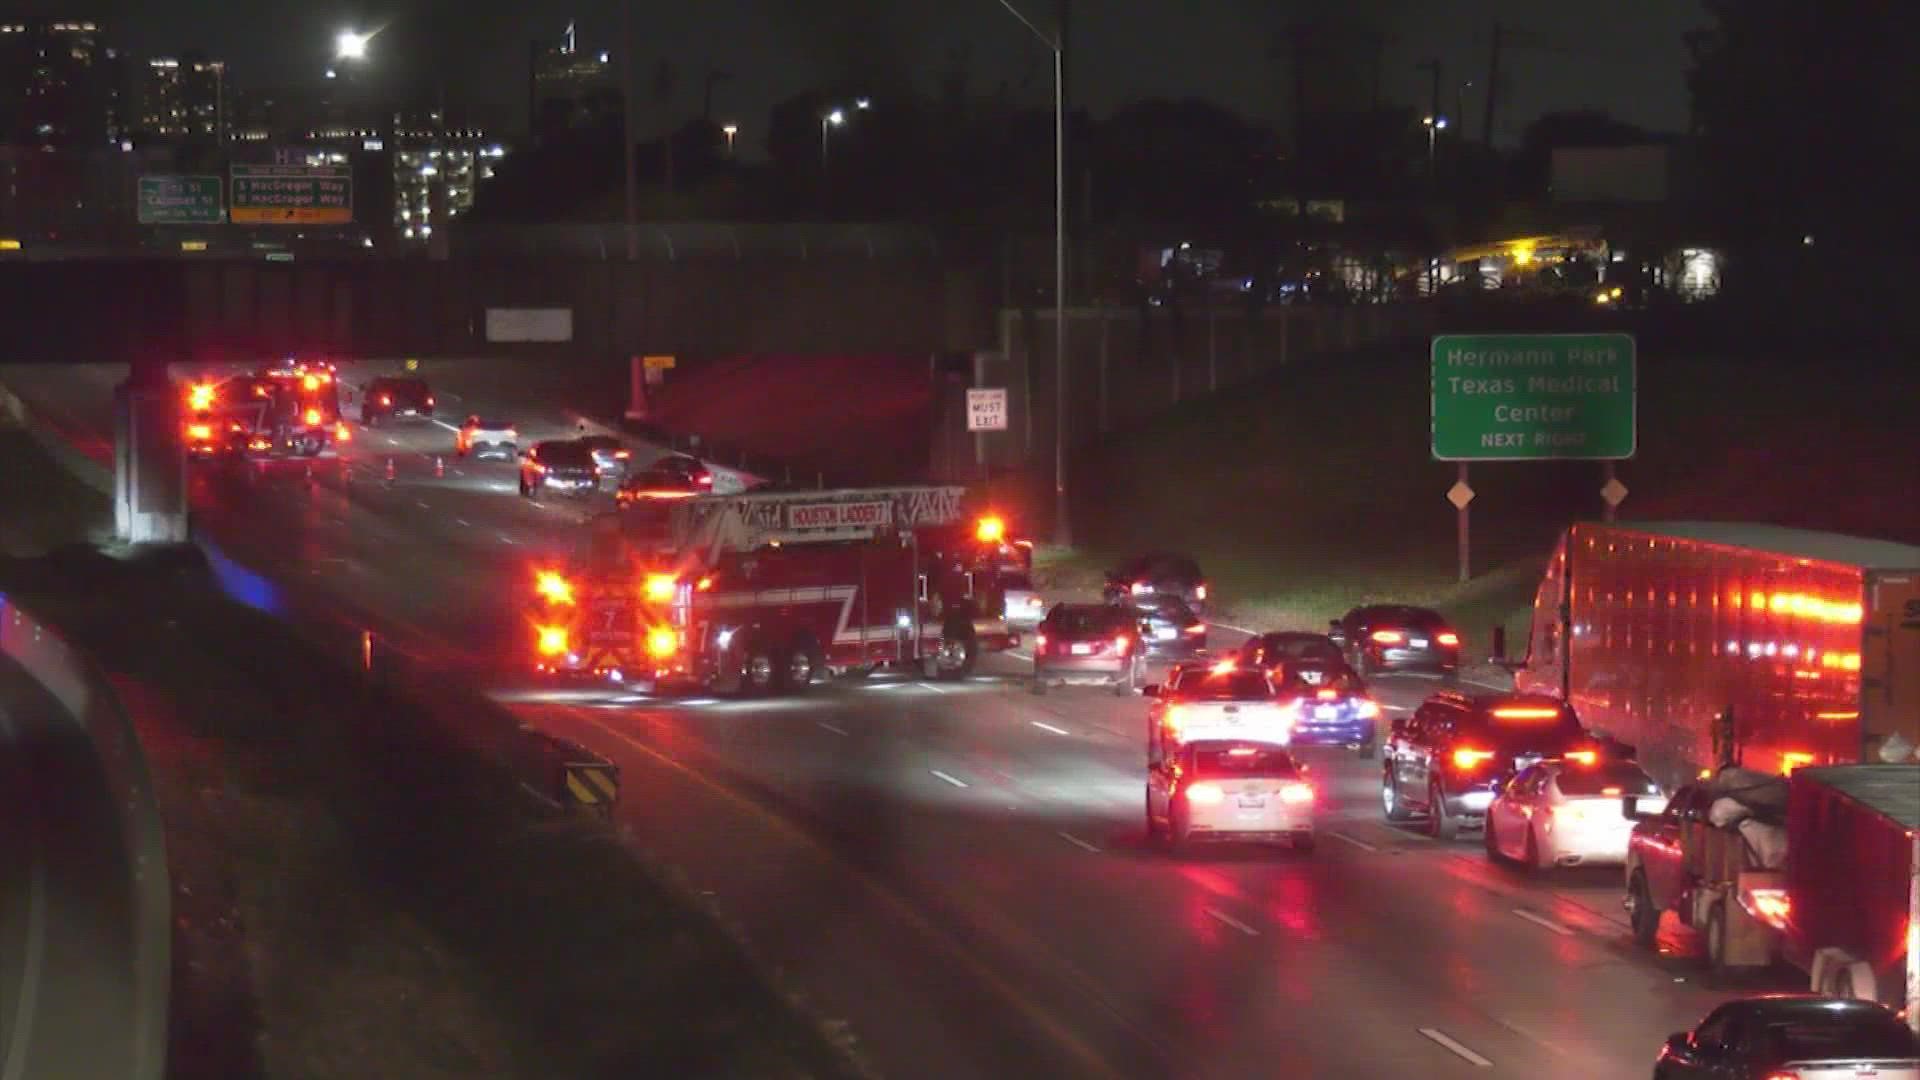 Both the northbound and southbound lanes of Highway 288 near MacGregor were closed Wednesday night due to a dangerous electric problem, according to Houston police.